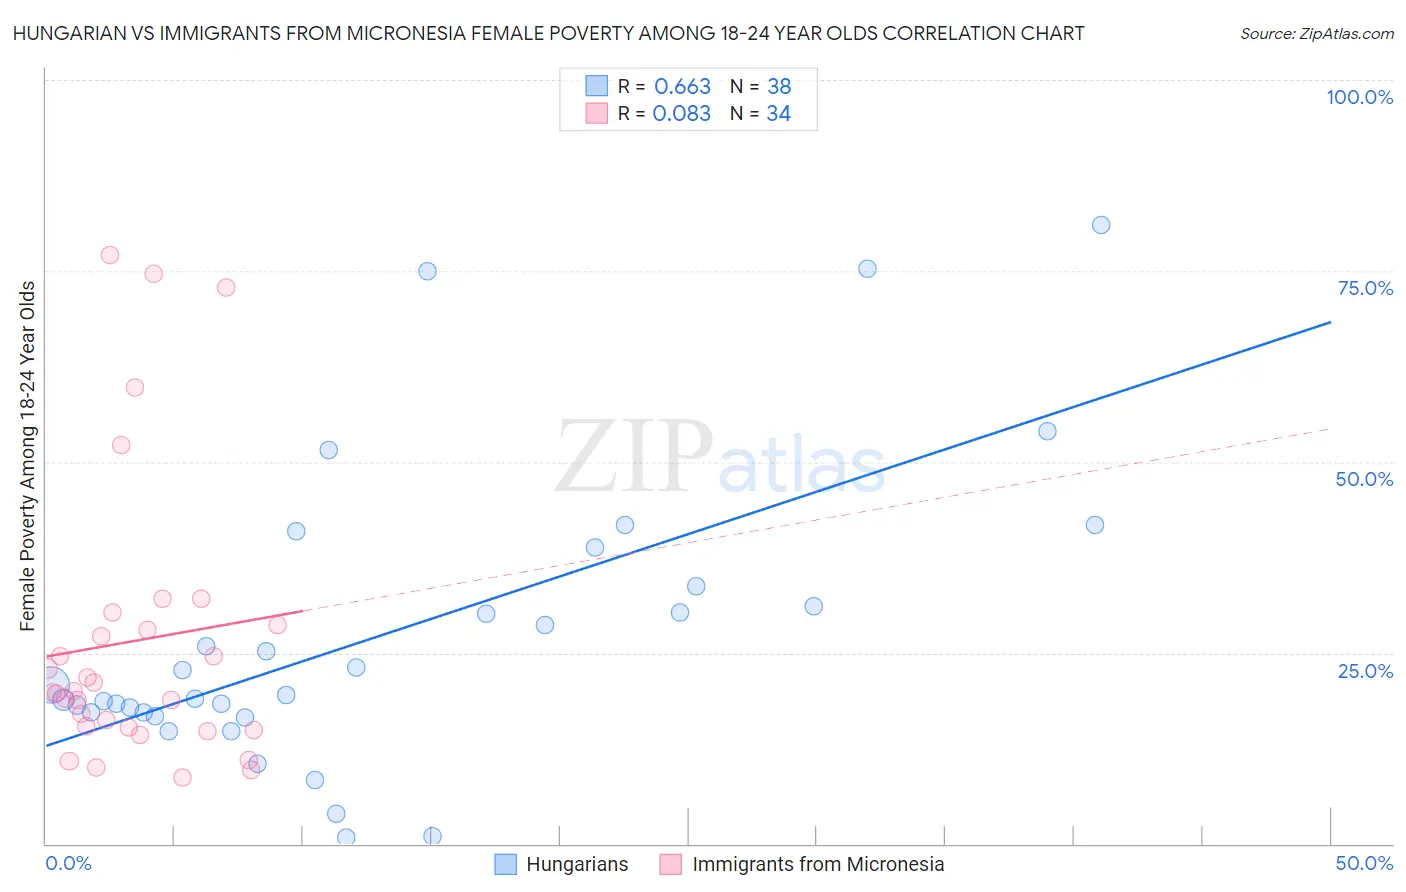 Hungarian vs Immigrants from Micronesia Female Poverty Among 18-24 Year Olds